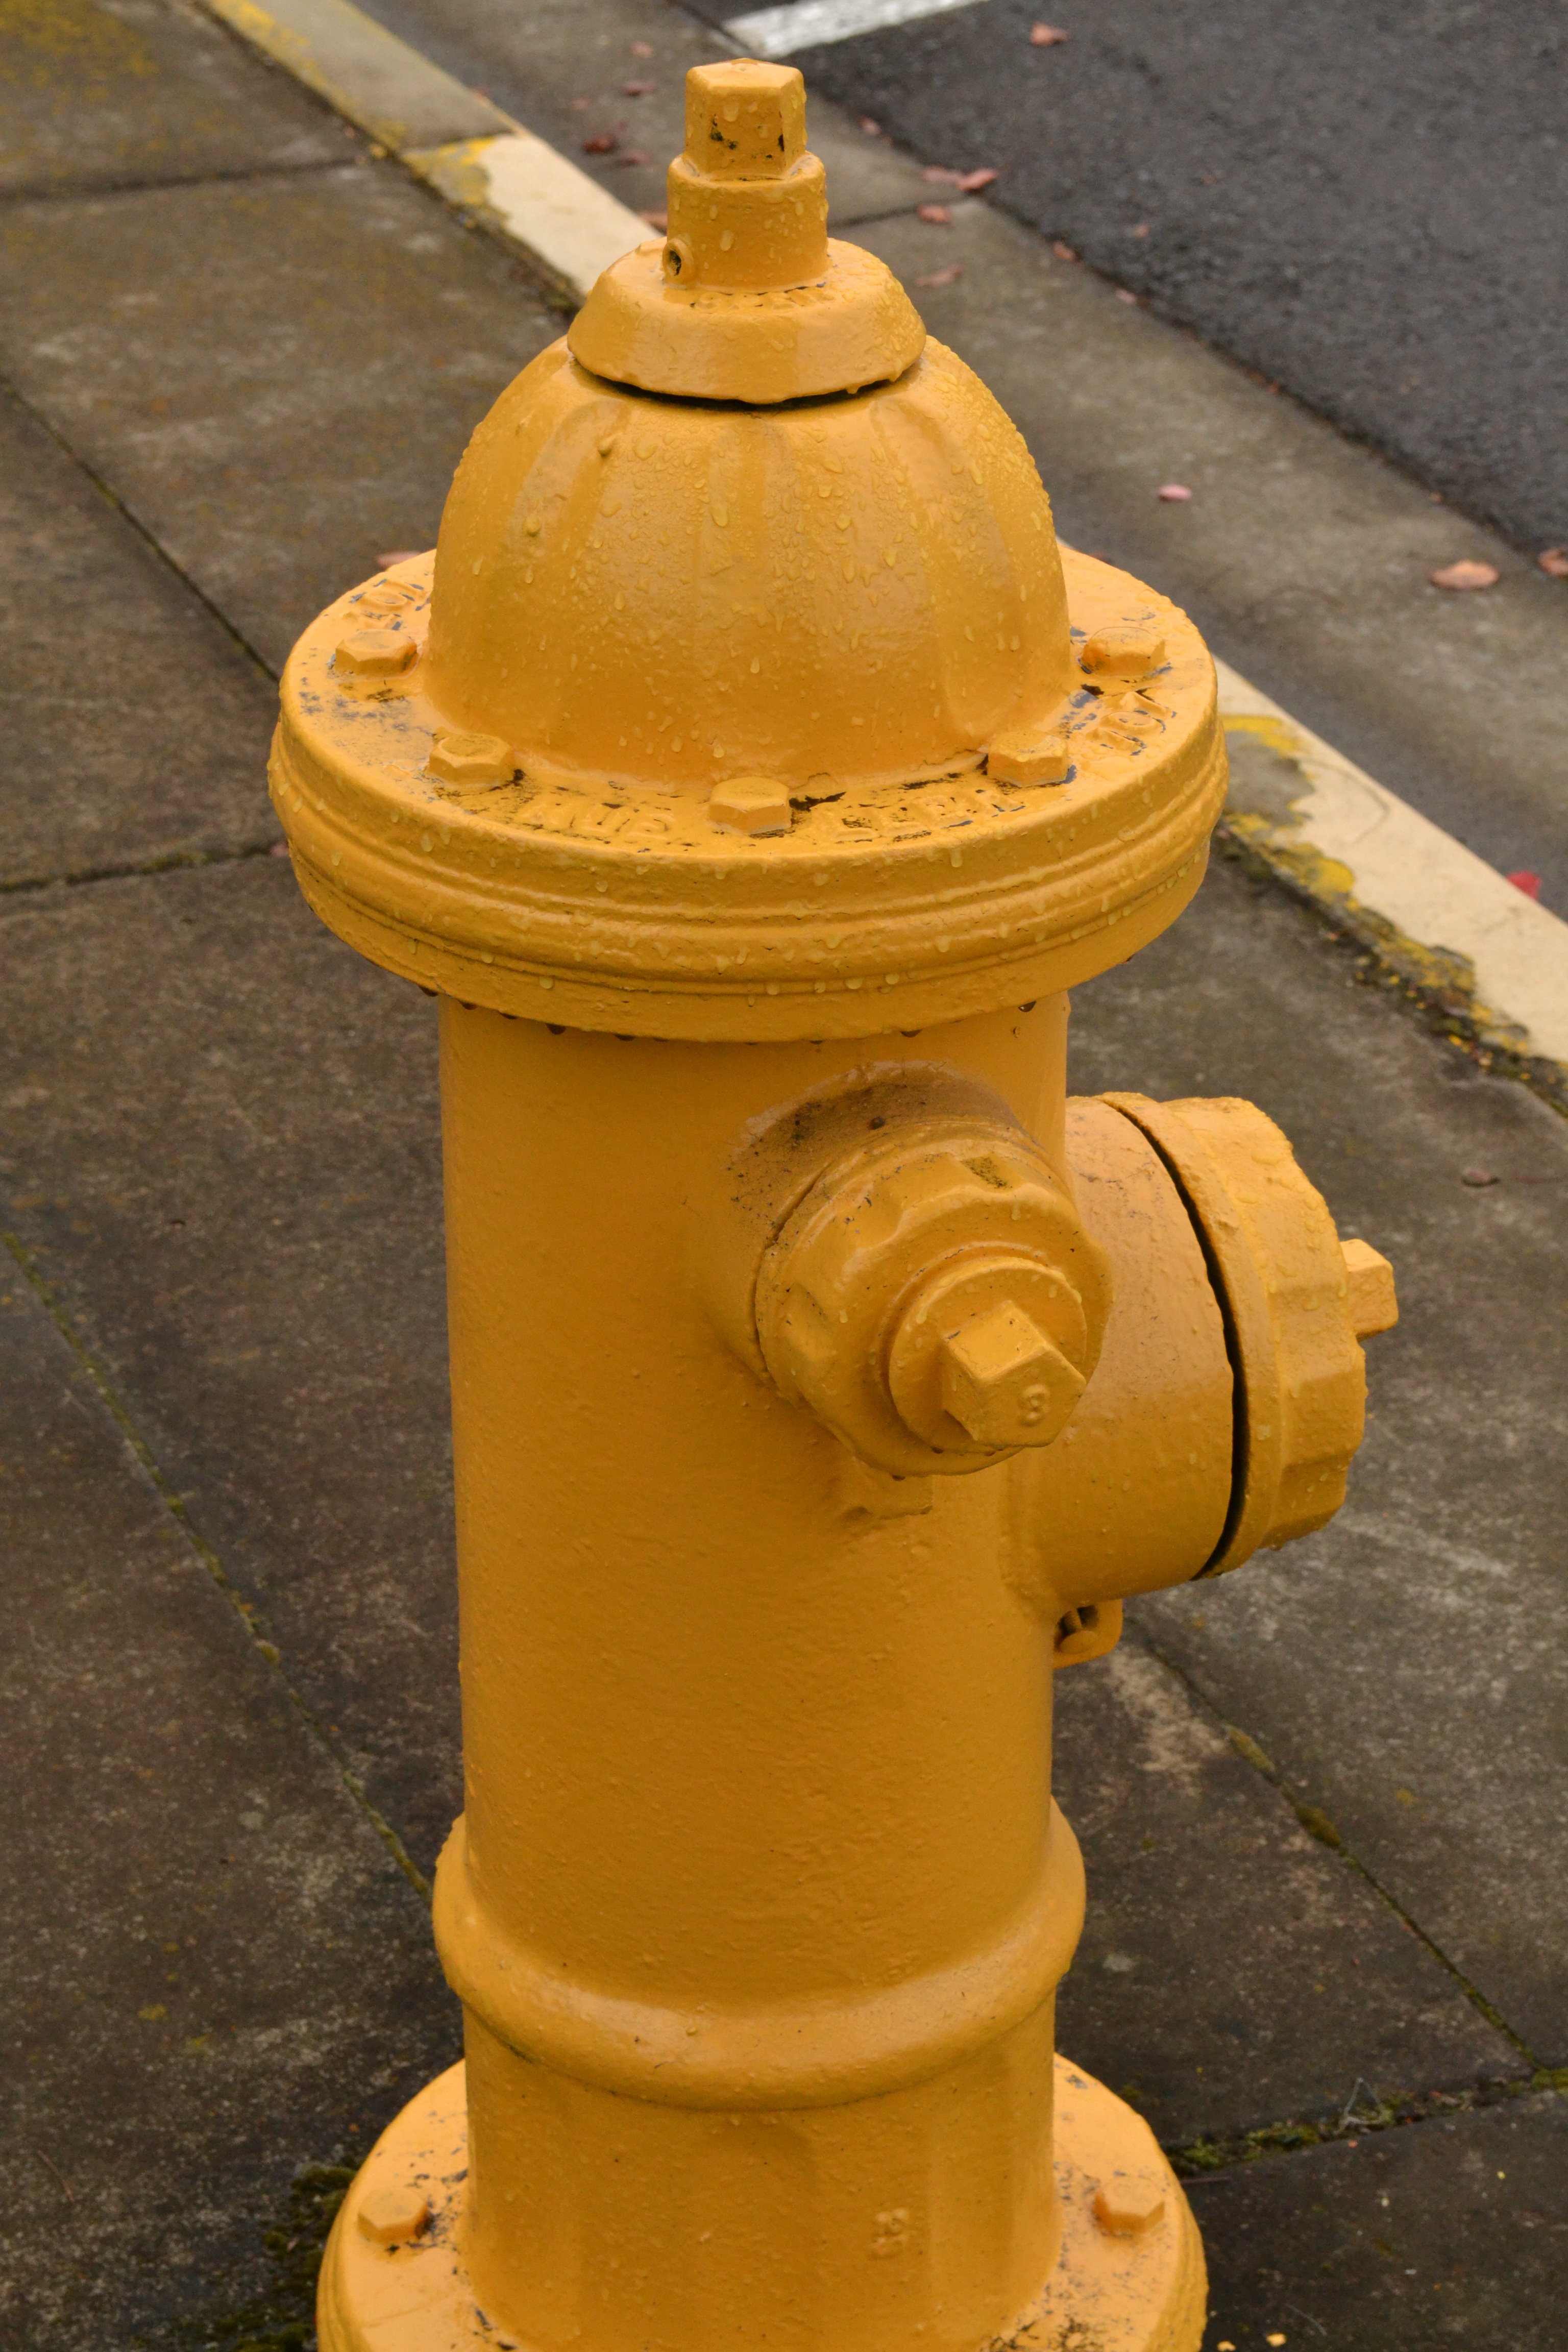 Download Yellow Fire Hydrant On The Road Free Image Download